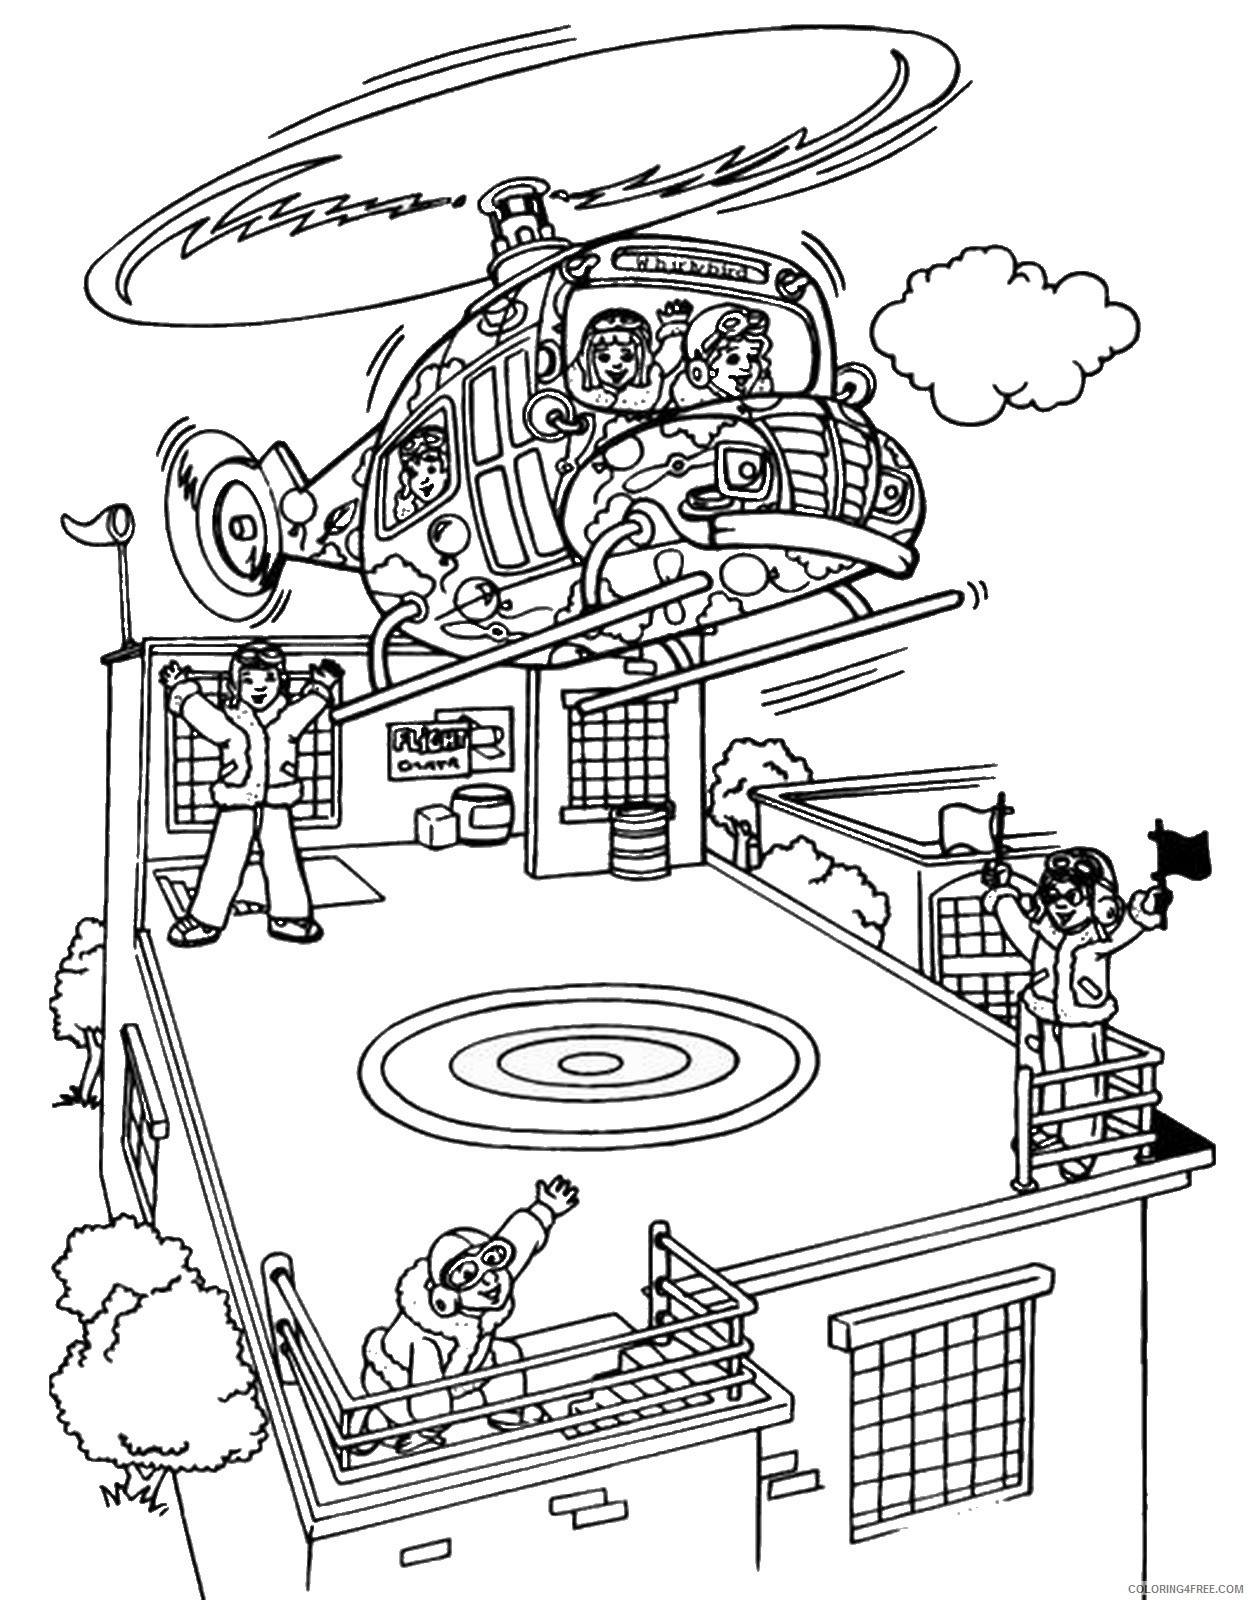 The Magic School Bus Coloring Pages Cartoons magic_school_bus_cl10 Printable 2020 6480 Coloring4free